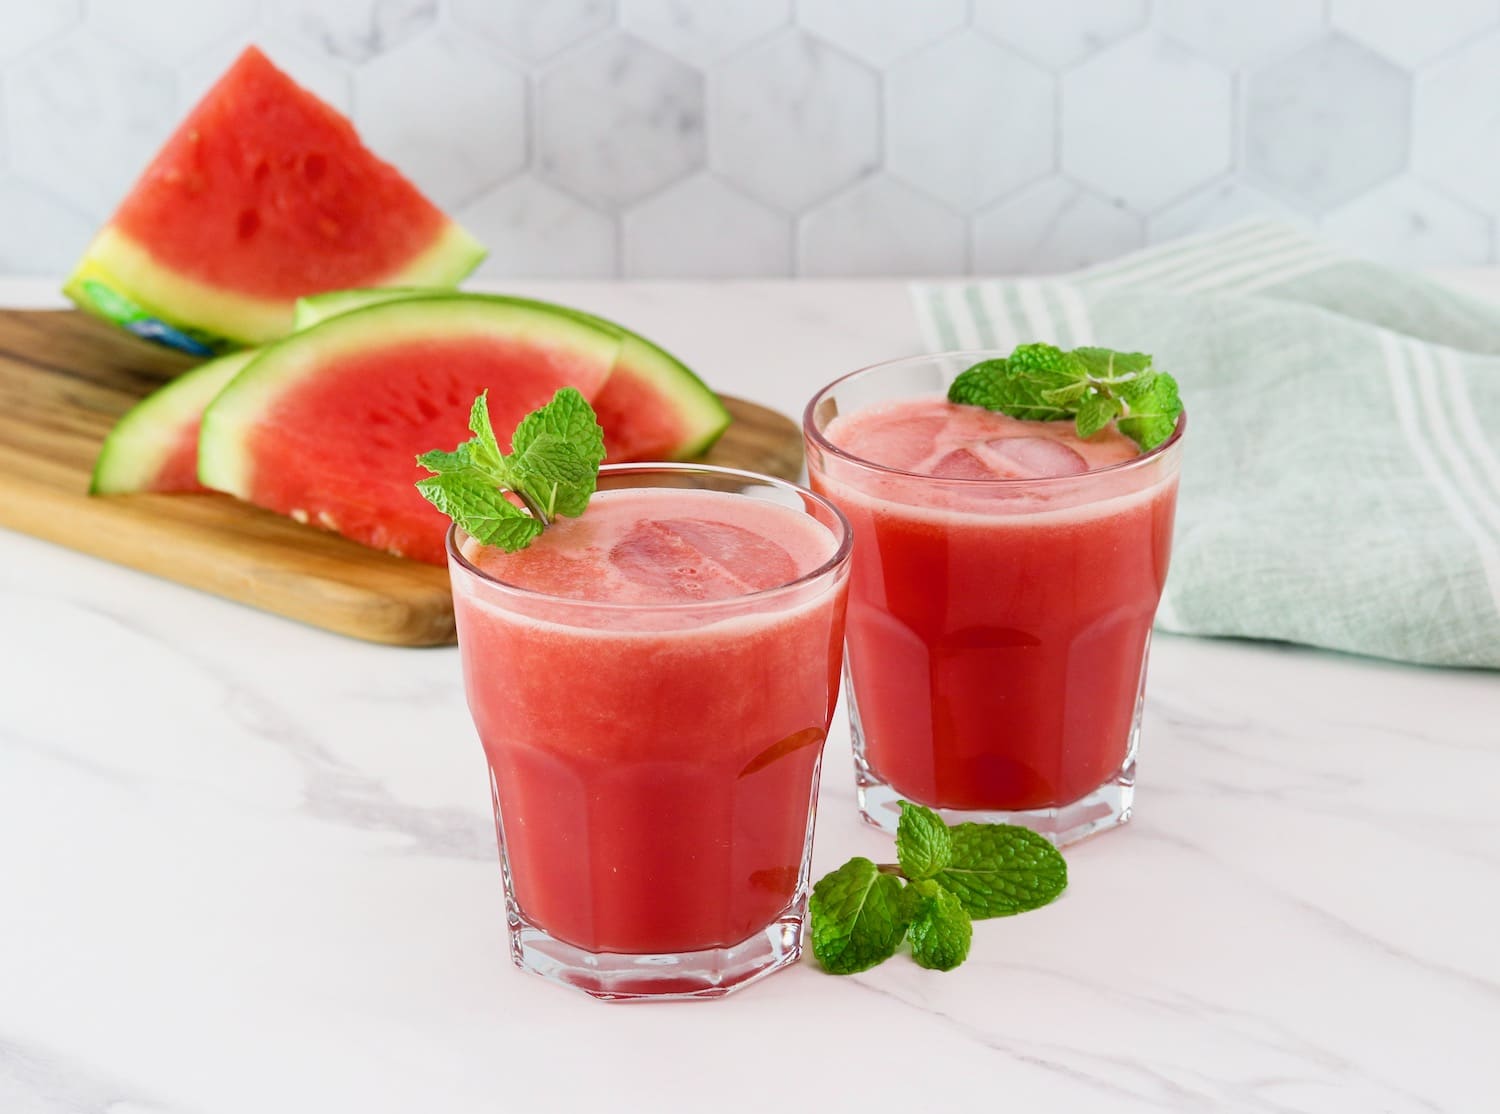 Horizontal shot of two short glasses filled with watermelon rum cocktail, garnished with fresh mint. Slices of watermelon sit on top of a wooden cutting board on the left side.